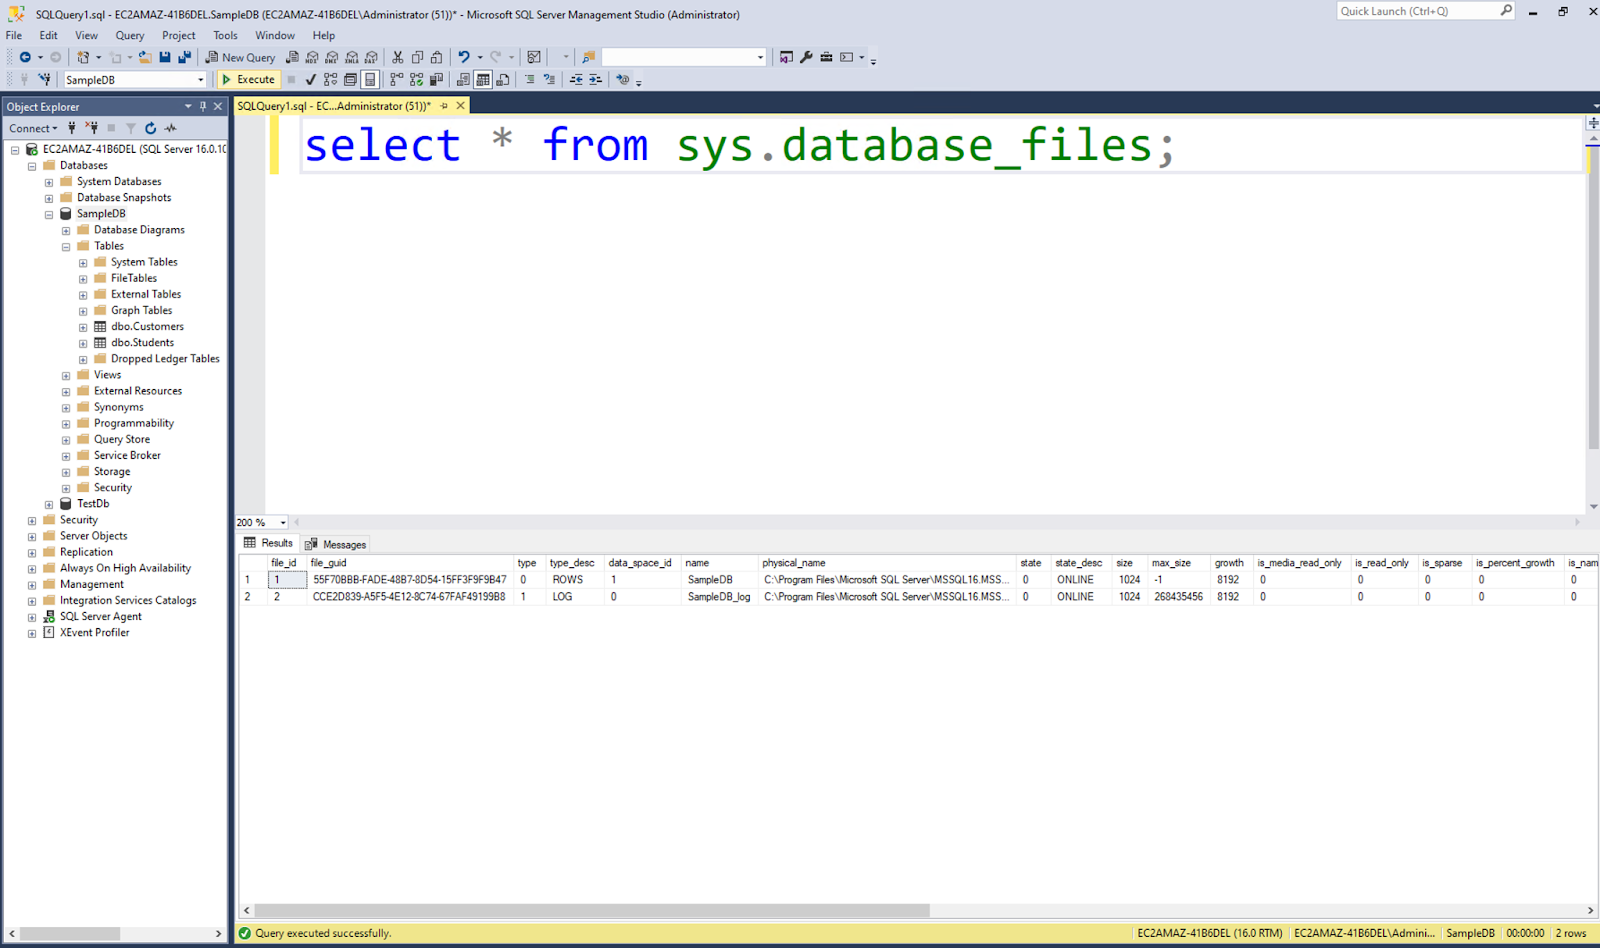 Query to retrieve all columns from database_files to view the physical_name column storing the log file location